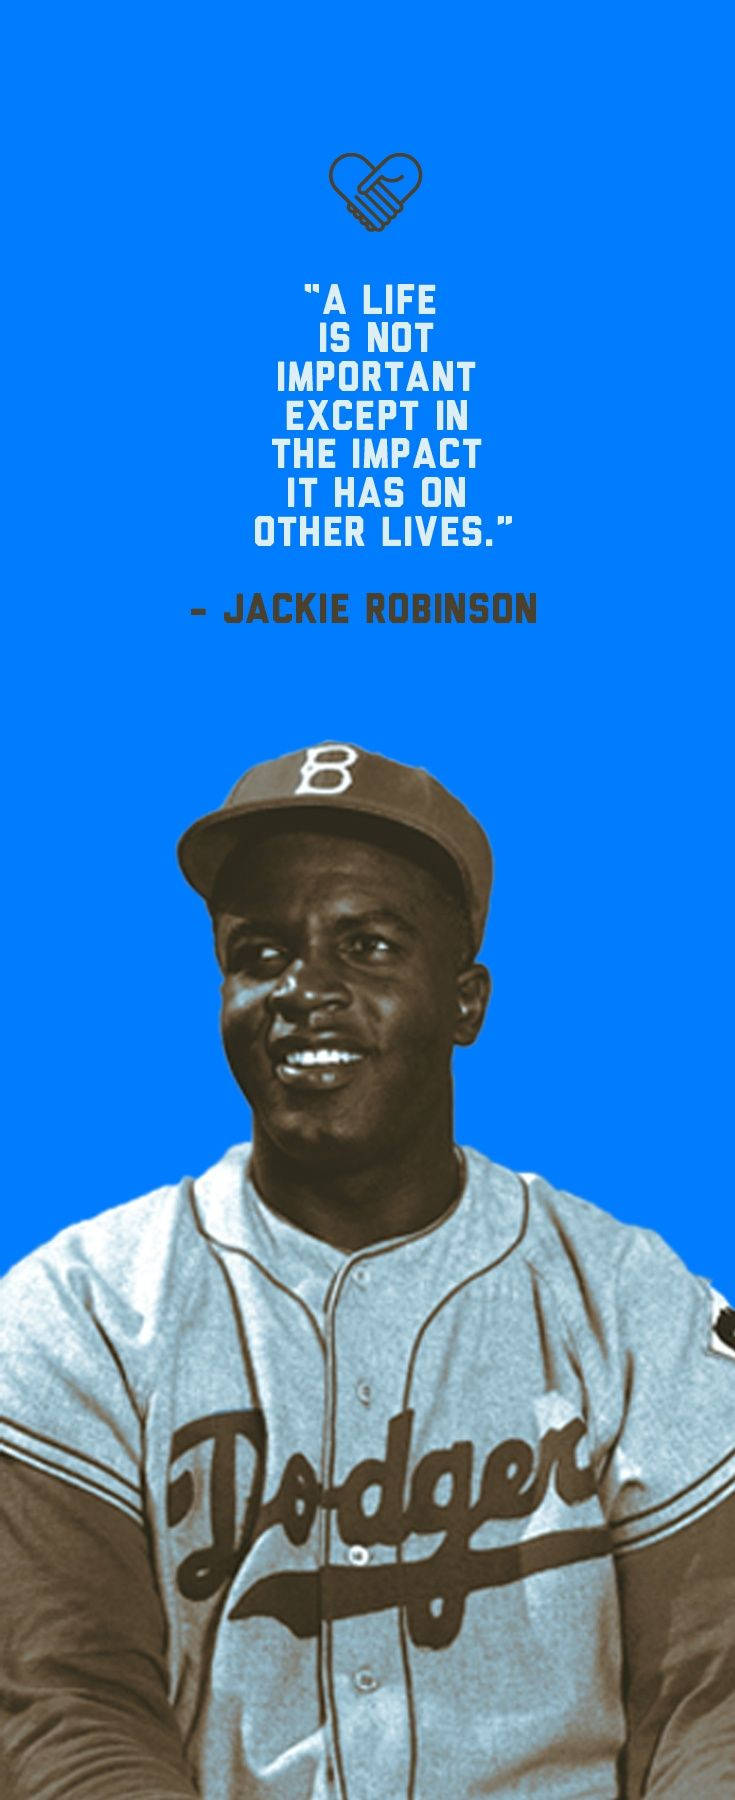 Jackie Robinson Quote About Life Wallpaper